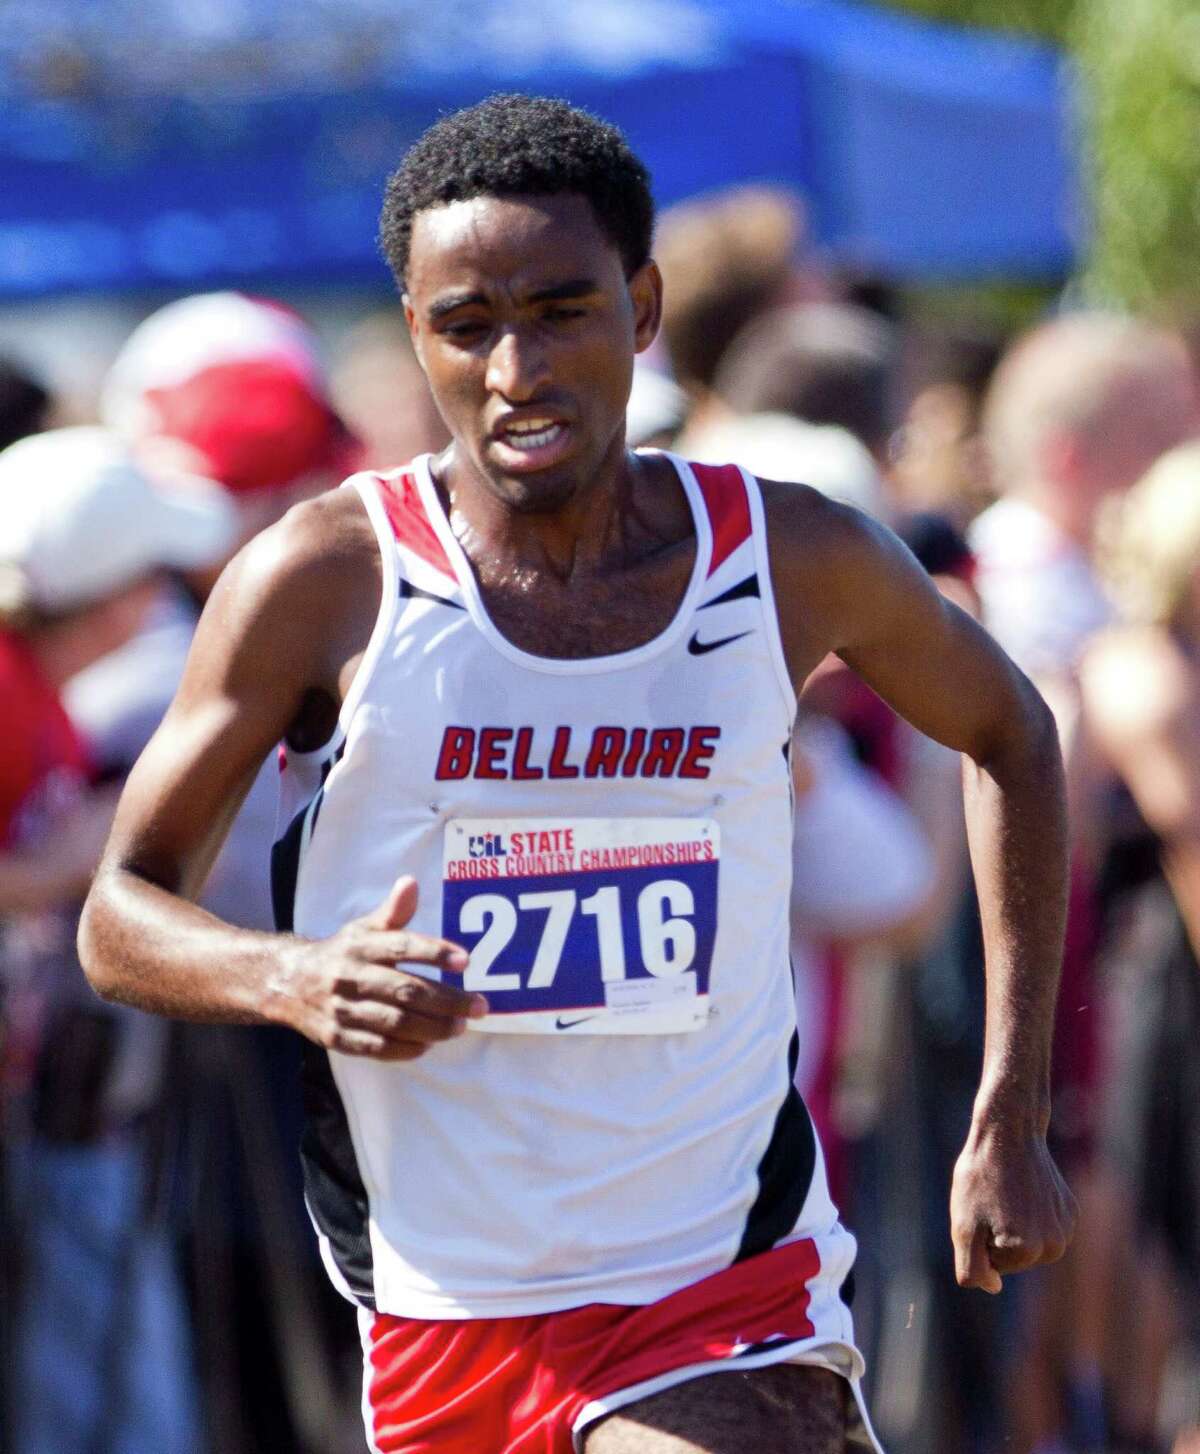 Jemal Wote, of Bellaire, competes in the Class 6A boys race during the UIL state cross country championships in Round Rock.